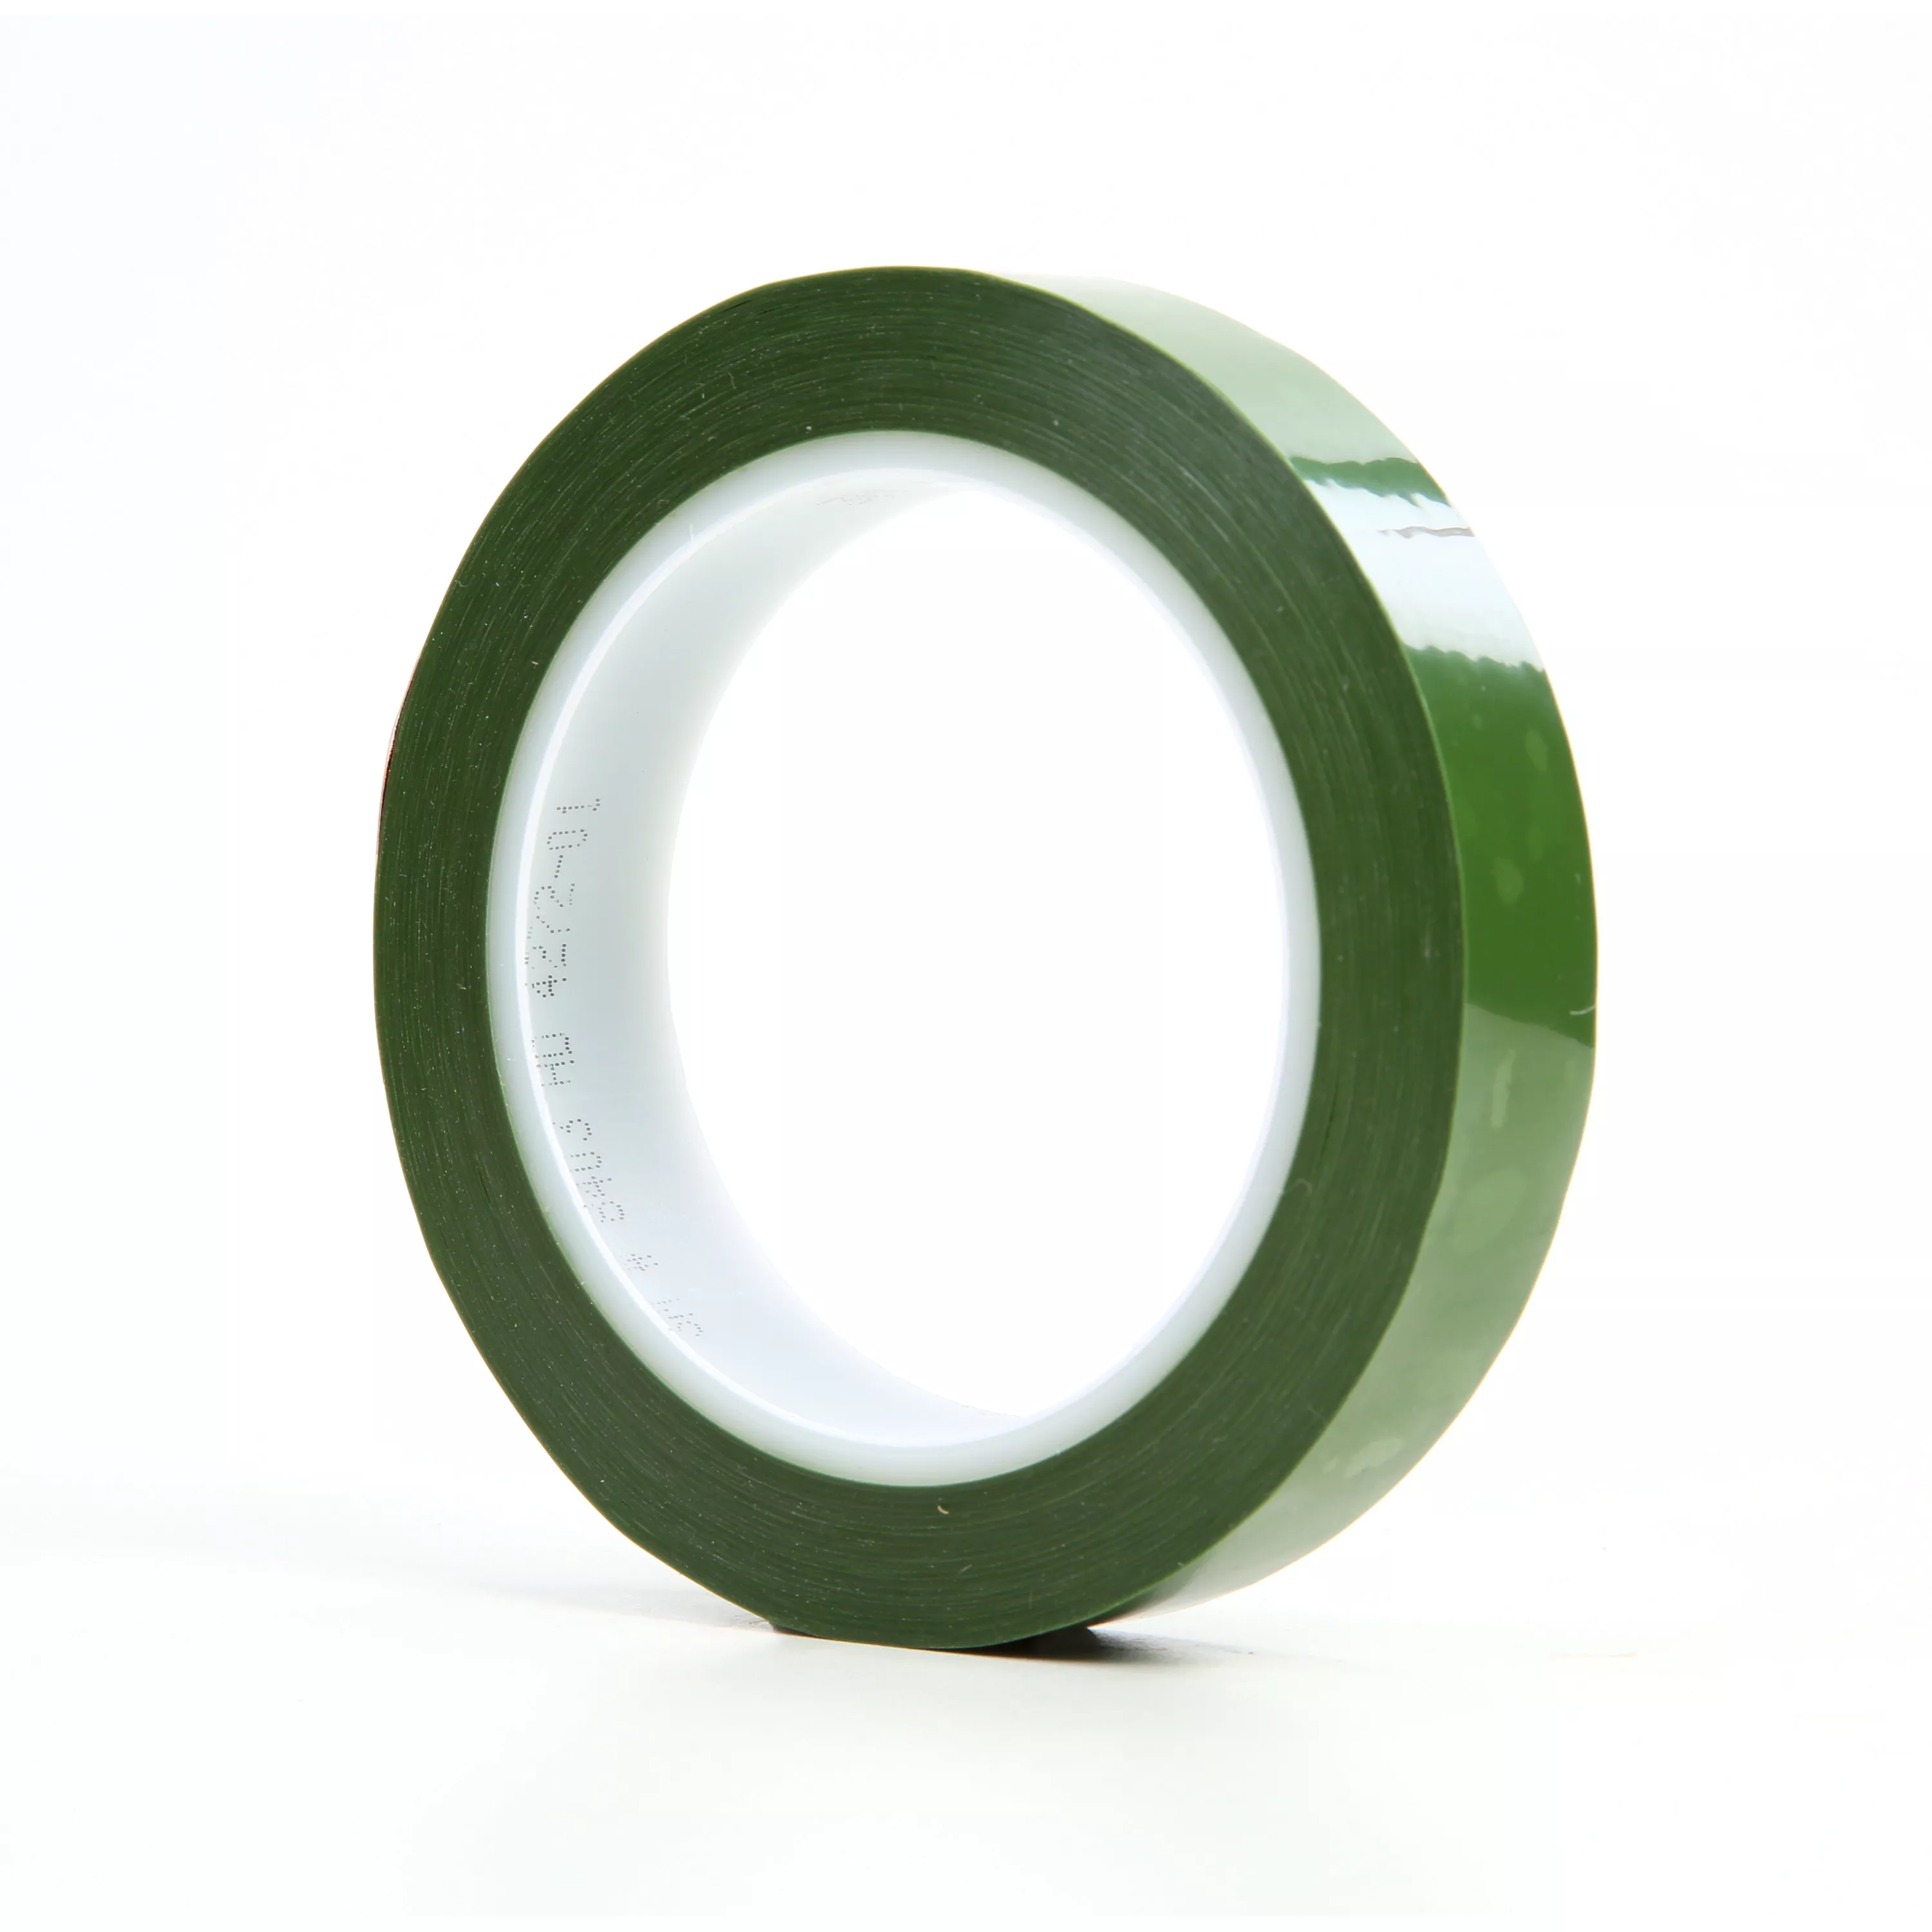 3M™ Polyester Tape 8403, Green, 3/4 in x 72 yd, 2.4 mil, 48 Roll/Case